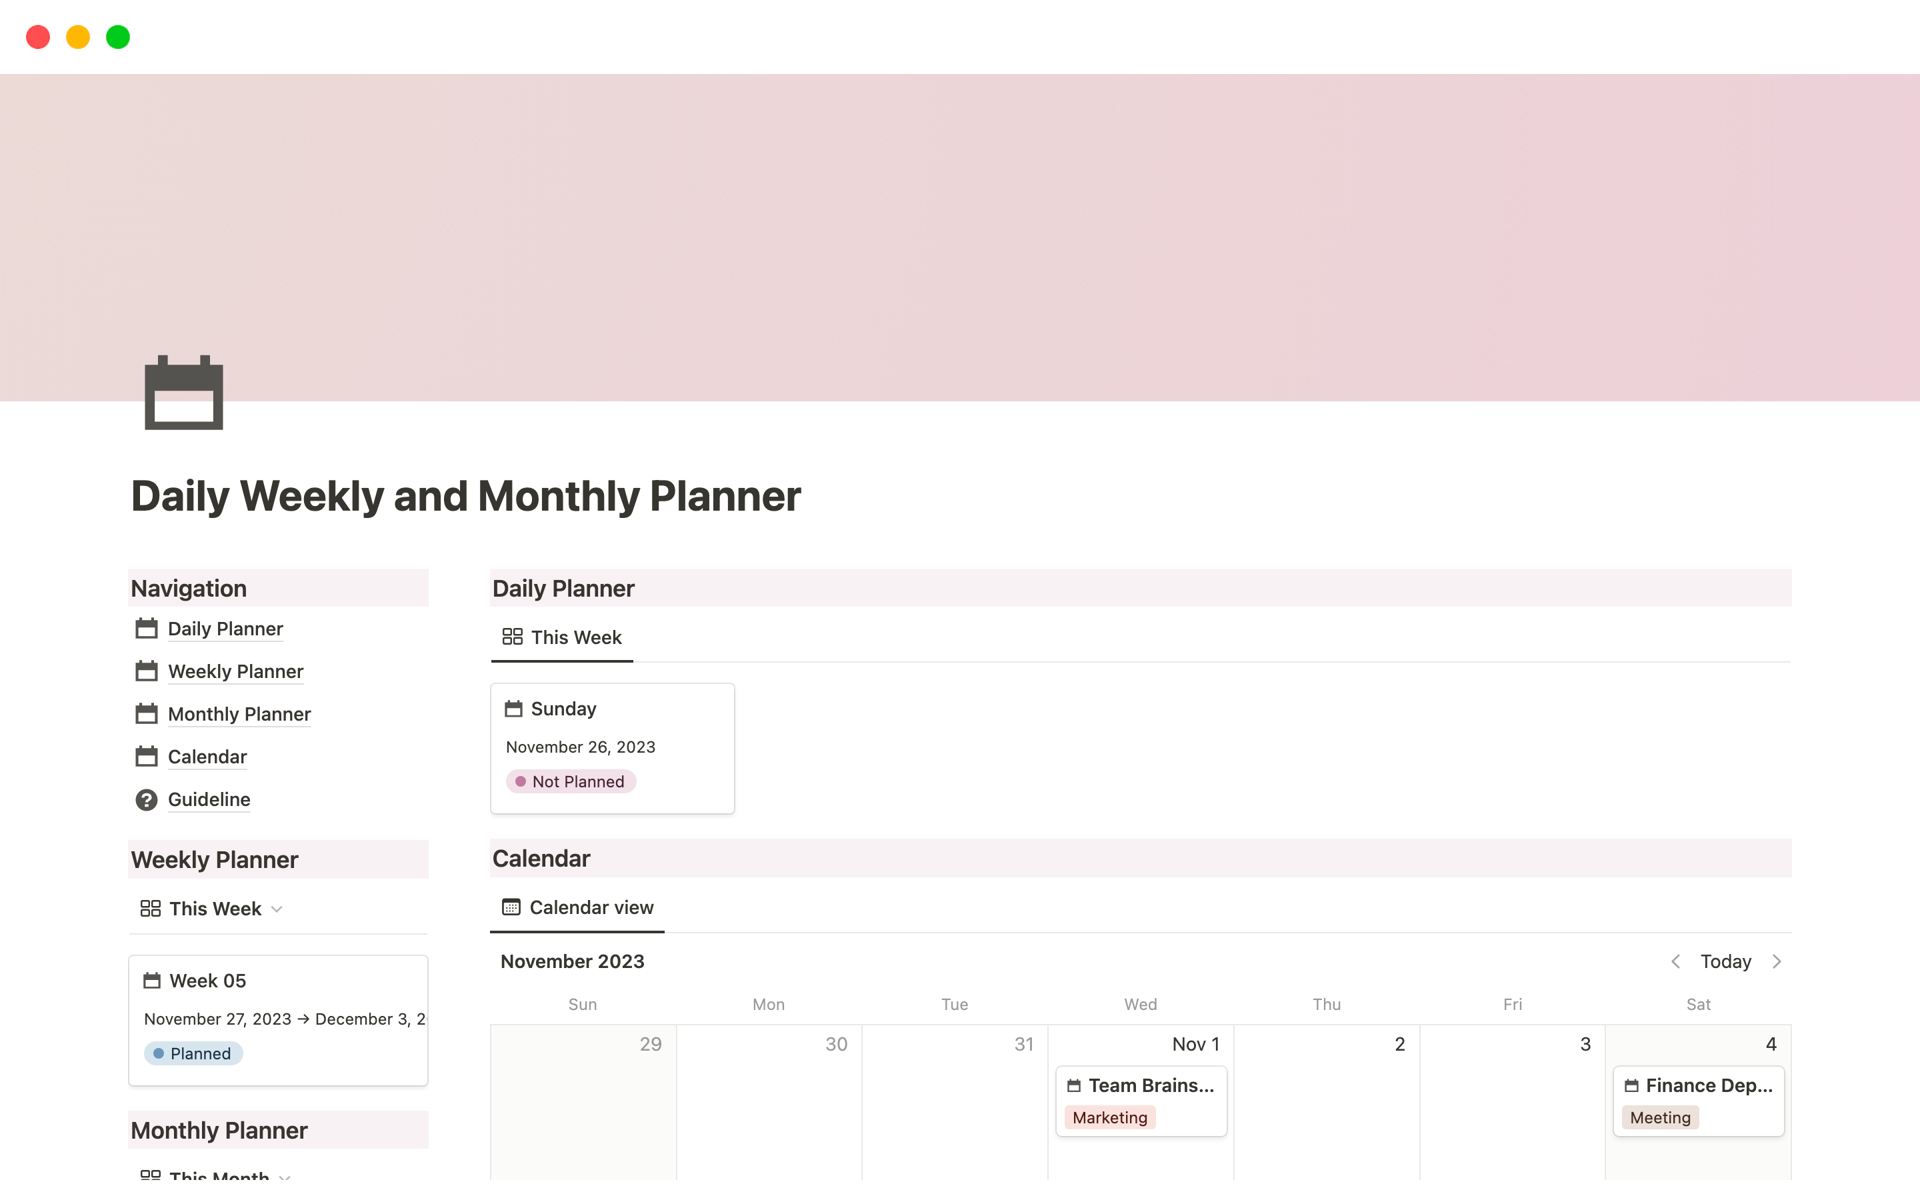 Optimize Your Productivity with Our All-in-One Notion Template! Elevate Your Daily, Weekly, and Monthly Planning with this Comprehensive Planner for Ultimate Efficiency.